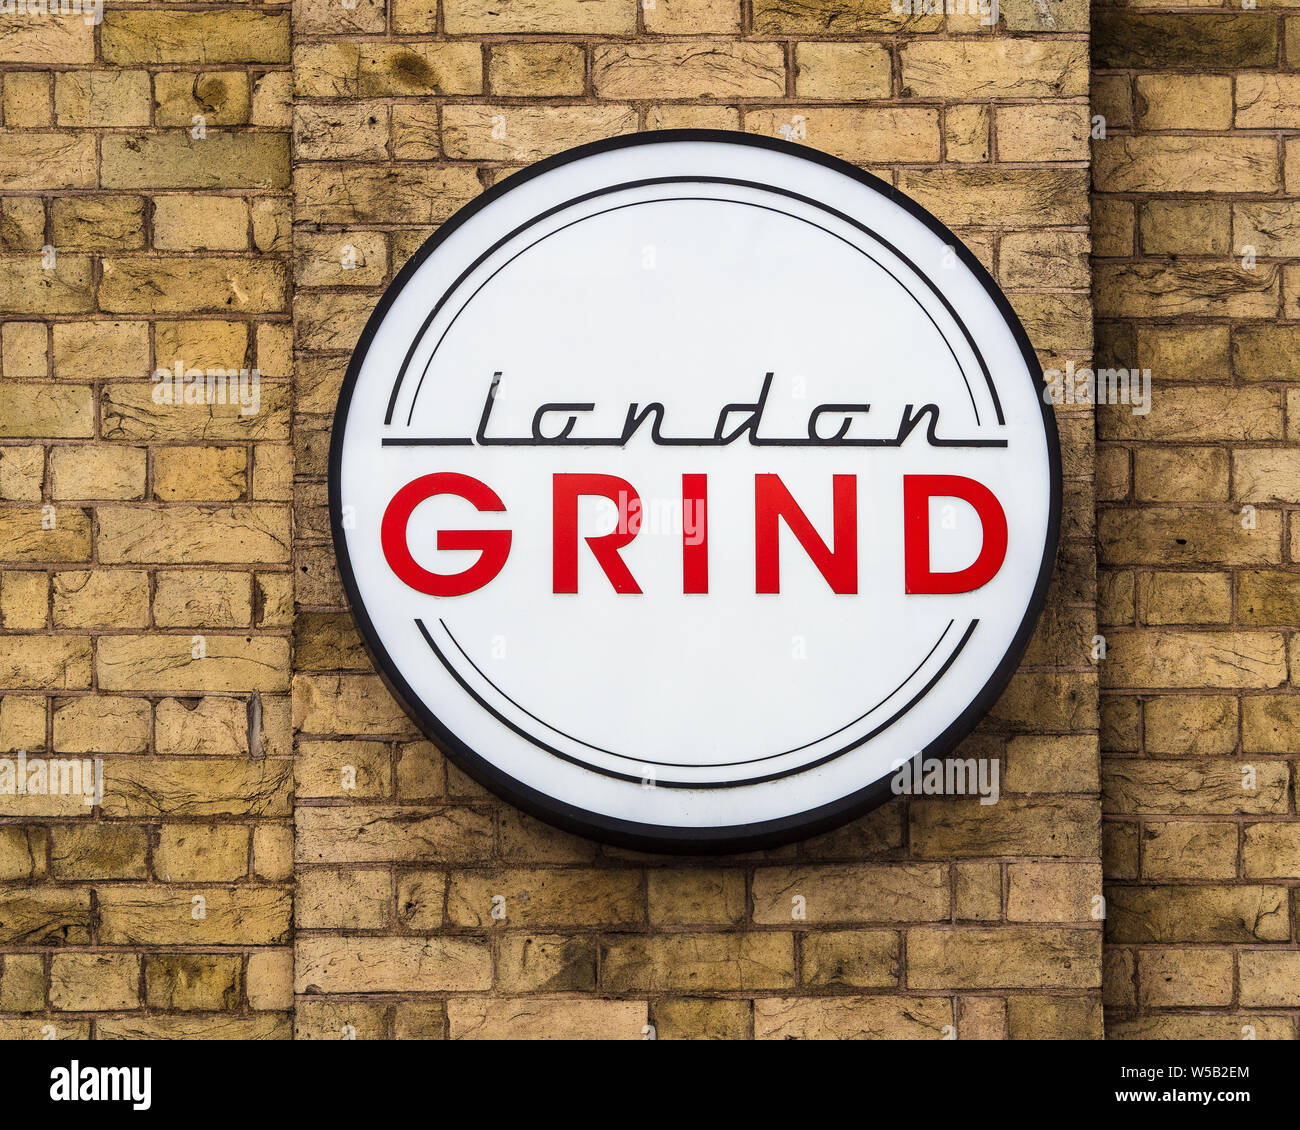 London Grind sign - London Grind is a riverside espresso bar, cocktail bar and restaurant near London Bridge in Central London Stock Photo